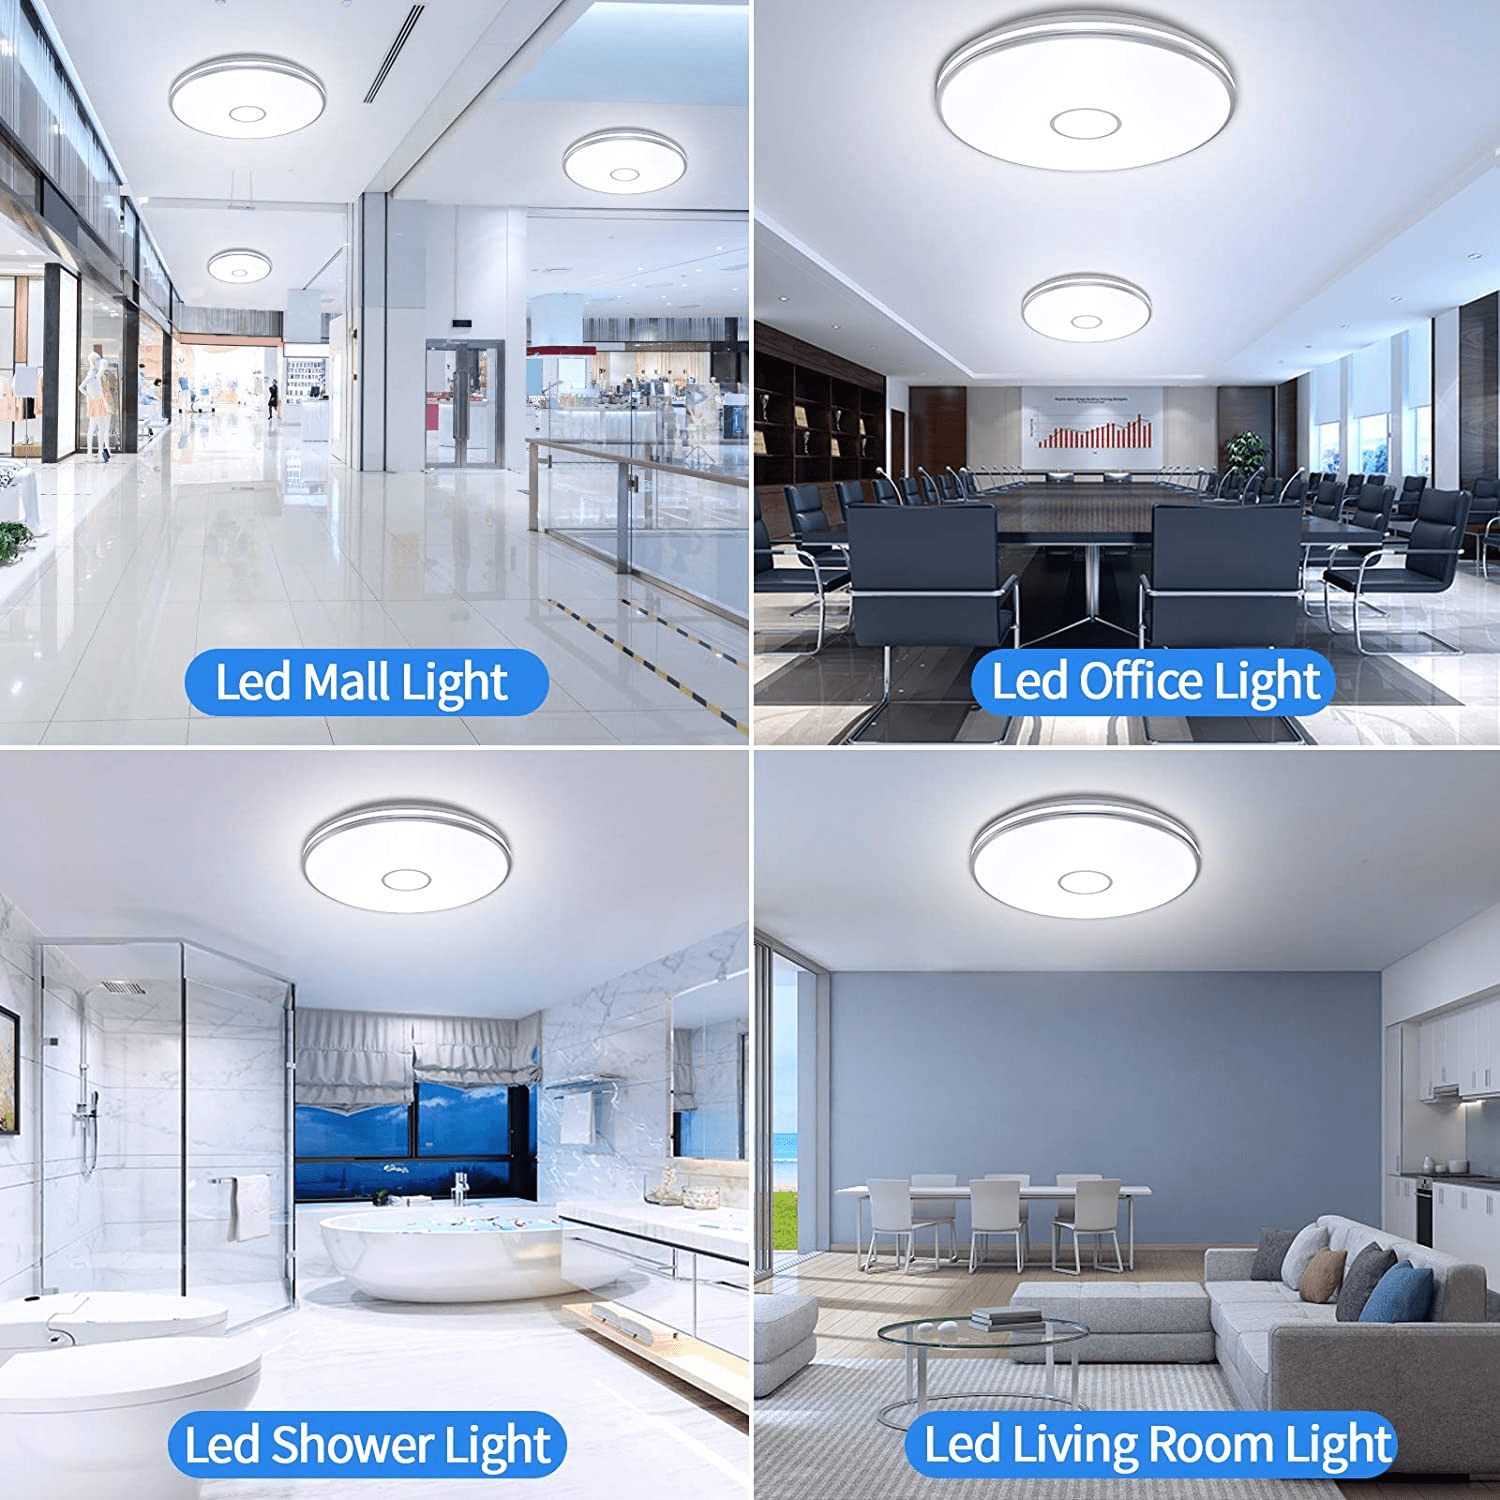 Upgrade Your Space with an Ultra-Bright 15-Inch Square LED Flush Mount Ceiling Light - 40W, 3800 Lumens, 5000K Daylight, Energy-Efficient, and IP44 Waterproof for Versatile, Sleek Design - Eco LED Lightings 